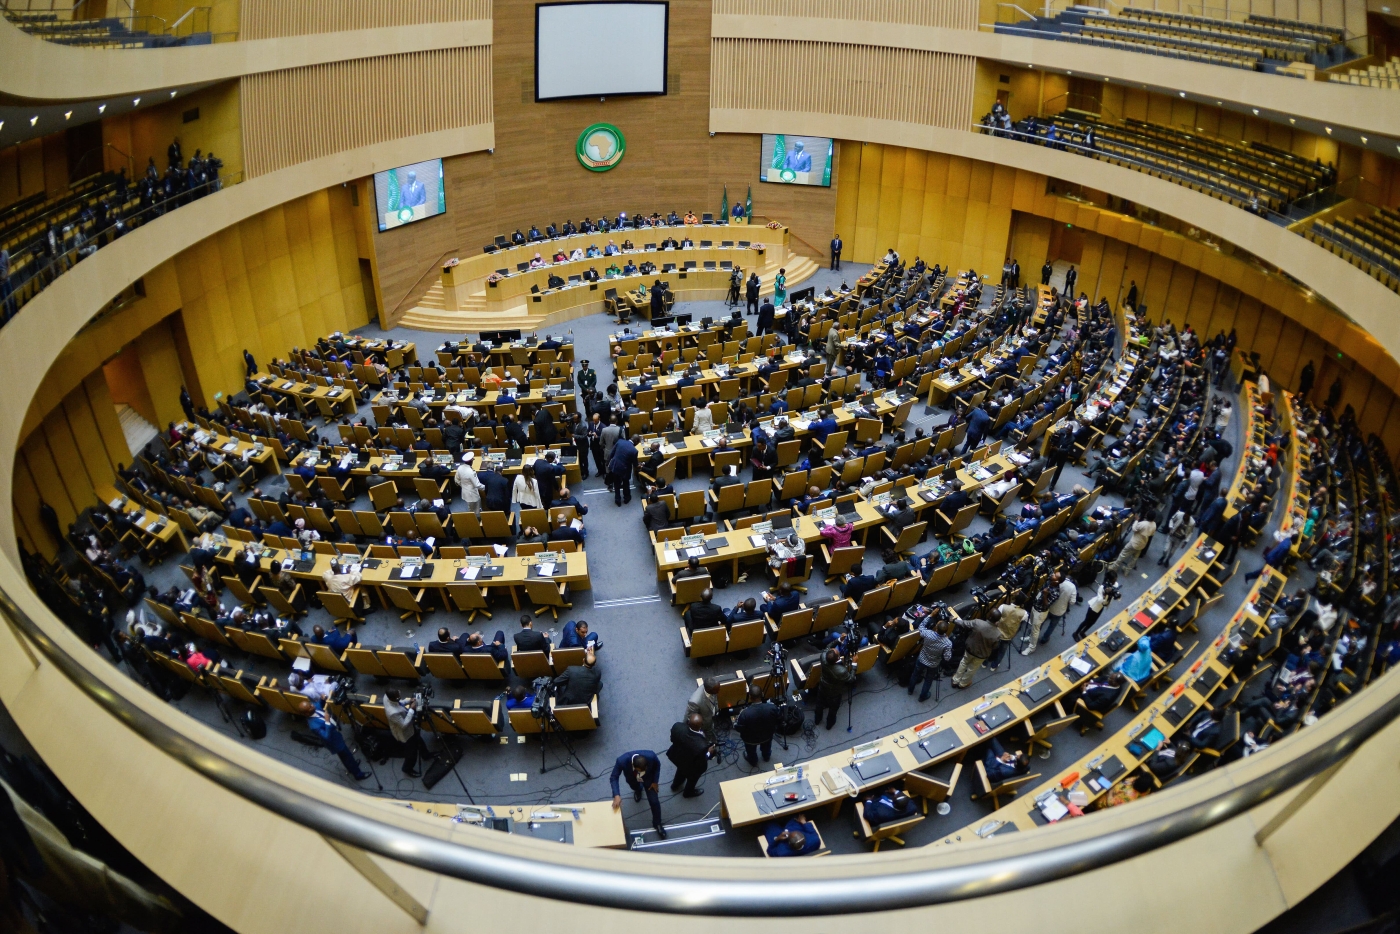 the African Union in Addis Ababa, Ethiopia